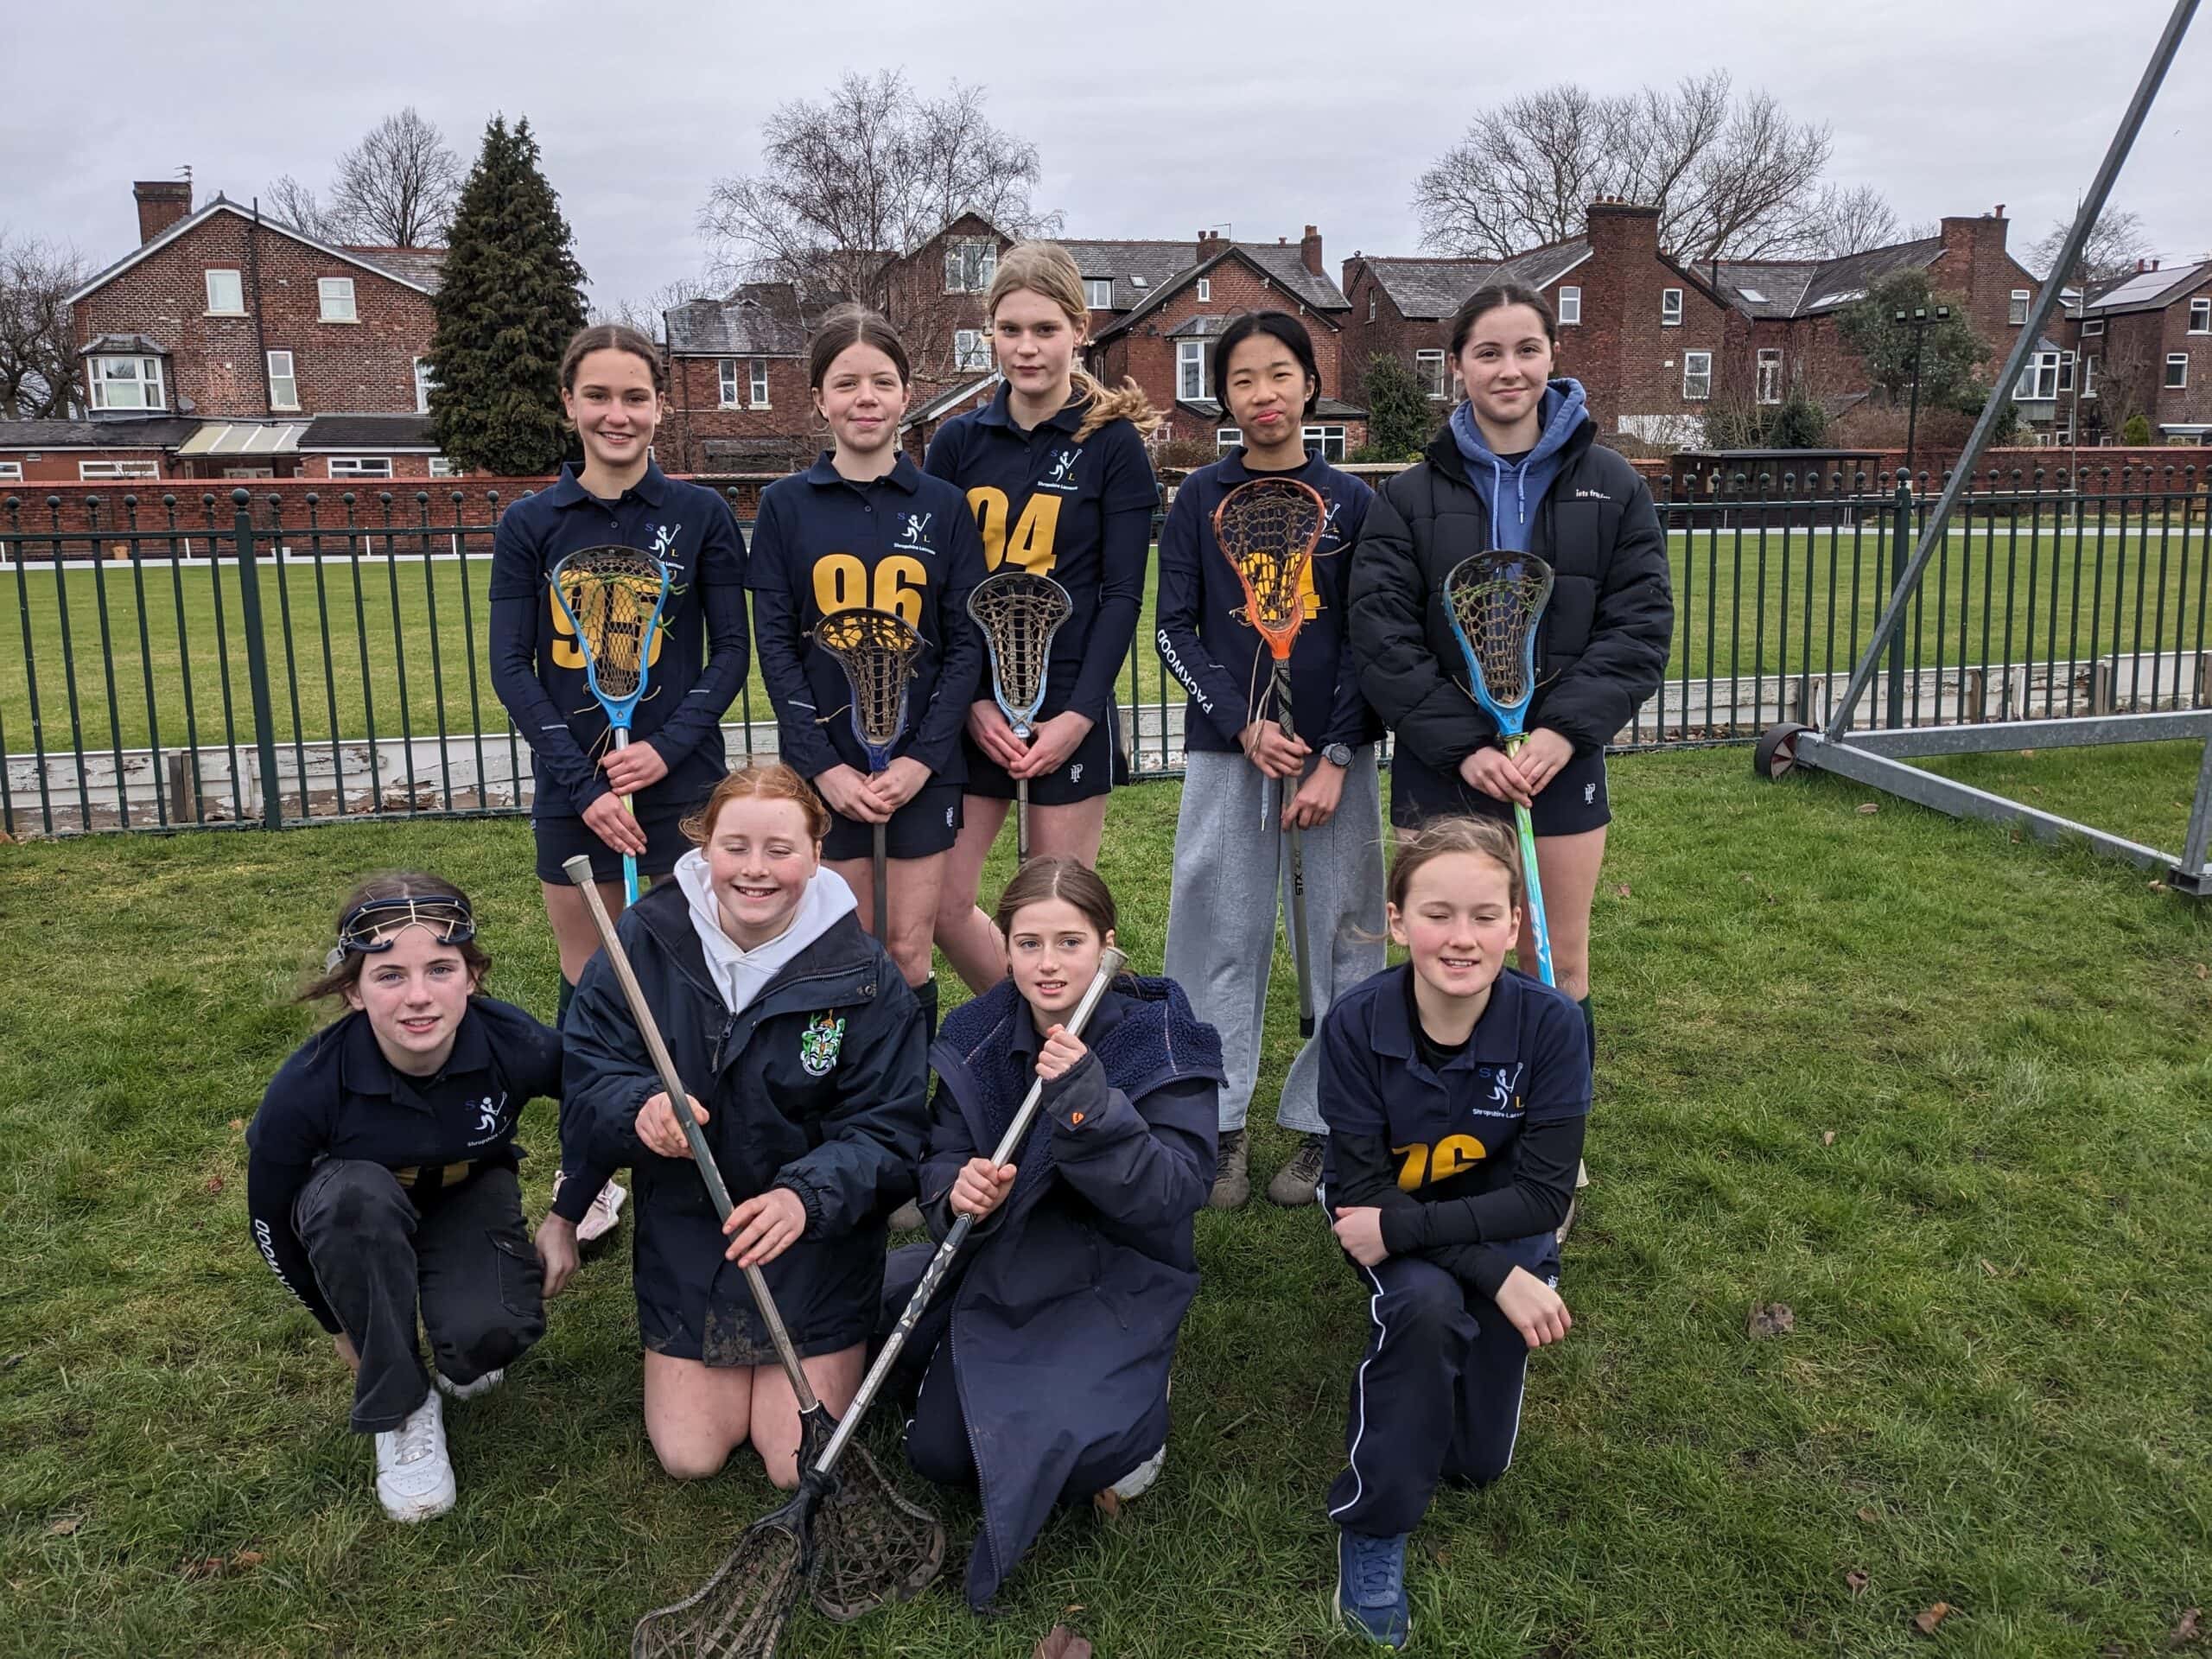 Nine lacrosse players ready for their match